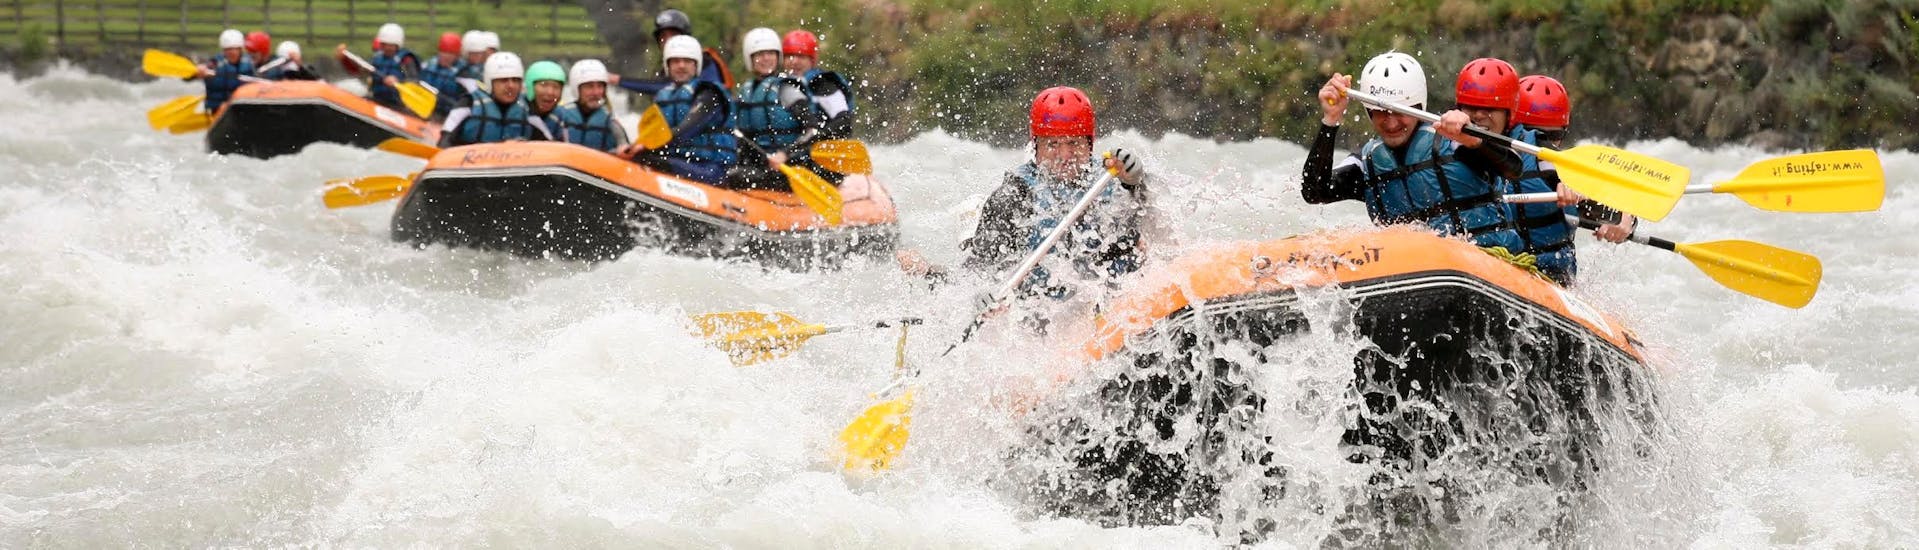 The waves are crushing on the raft during this adrenaline-filled activity of the Adventurous Rafting on the Dora Baltea with RaftingIT Valle d'Aosta.